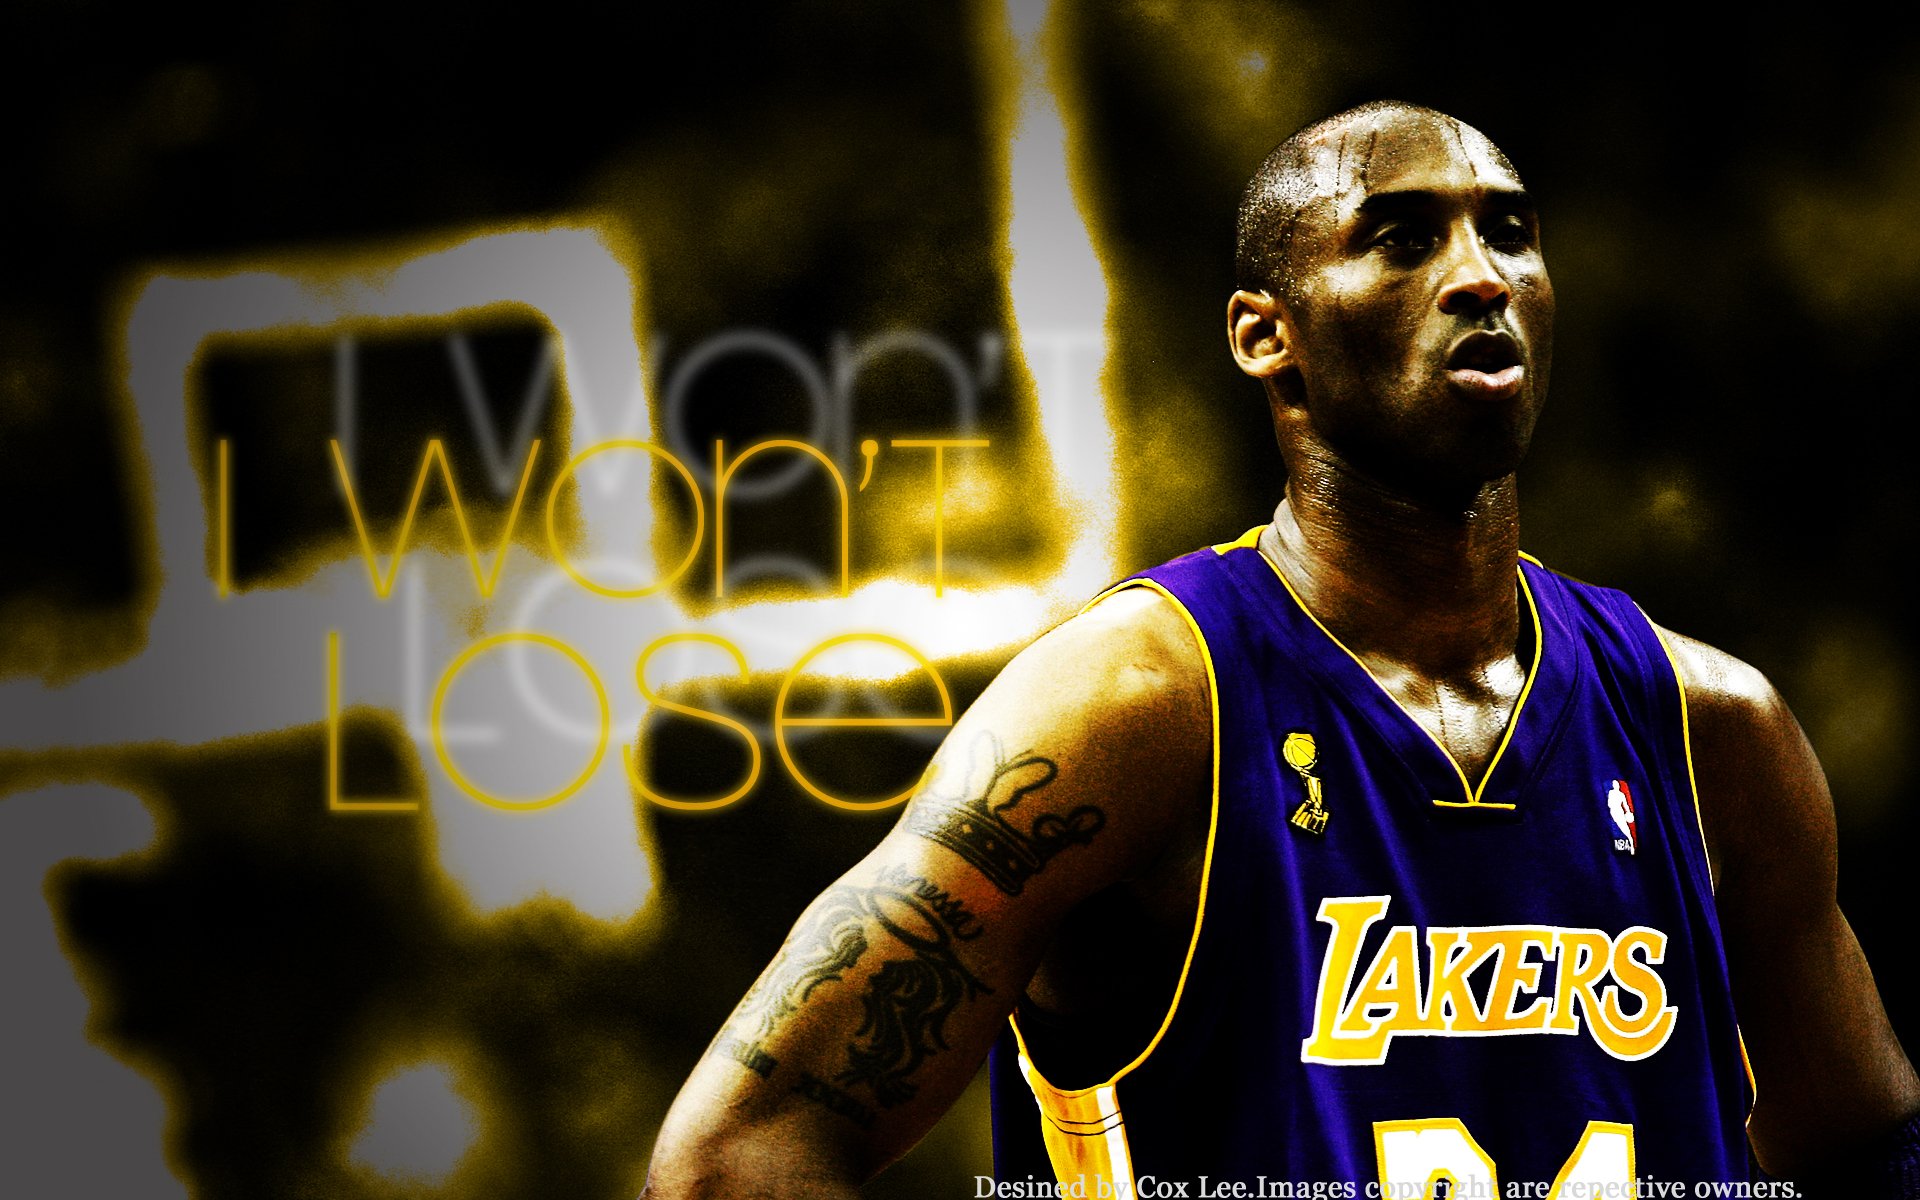 Kobe Bryant Quote Wallpapers - Top Free Kobe Bryant Quote Backgrounds ...